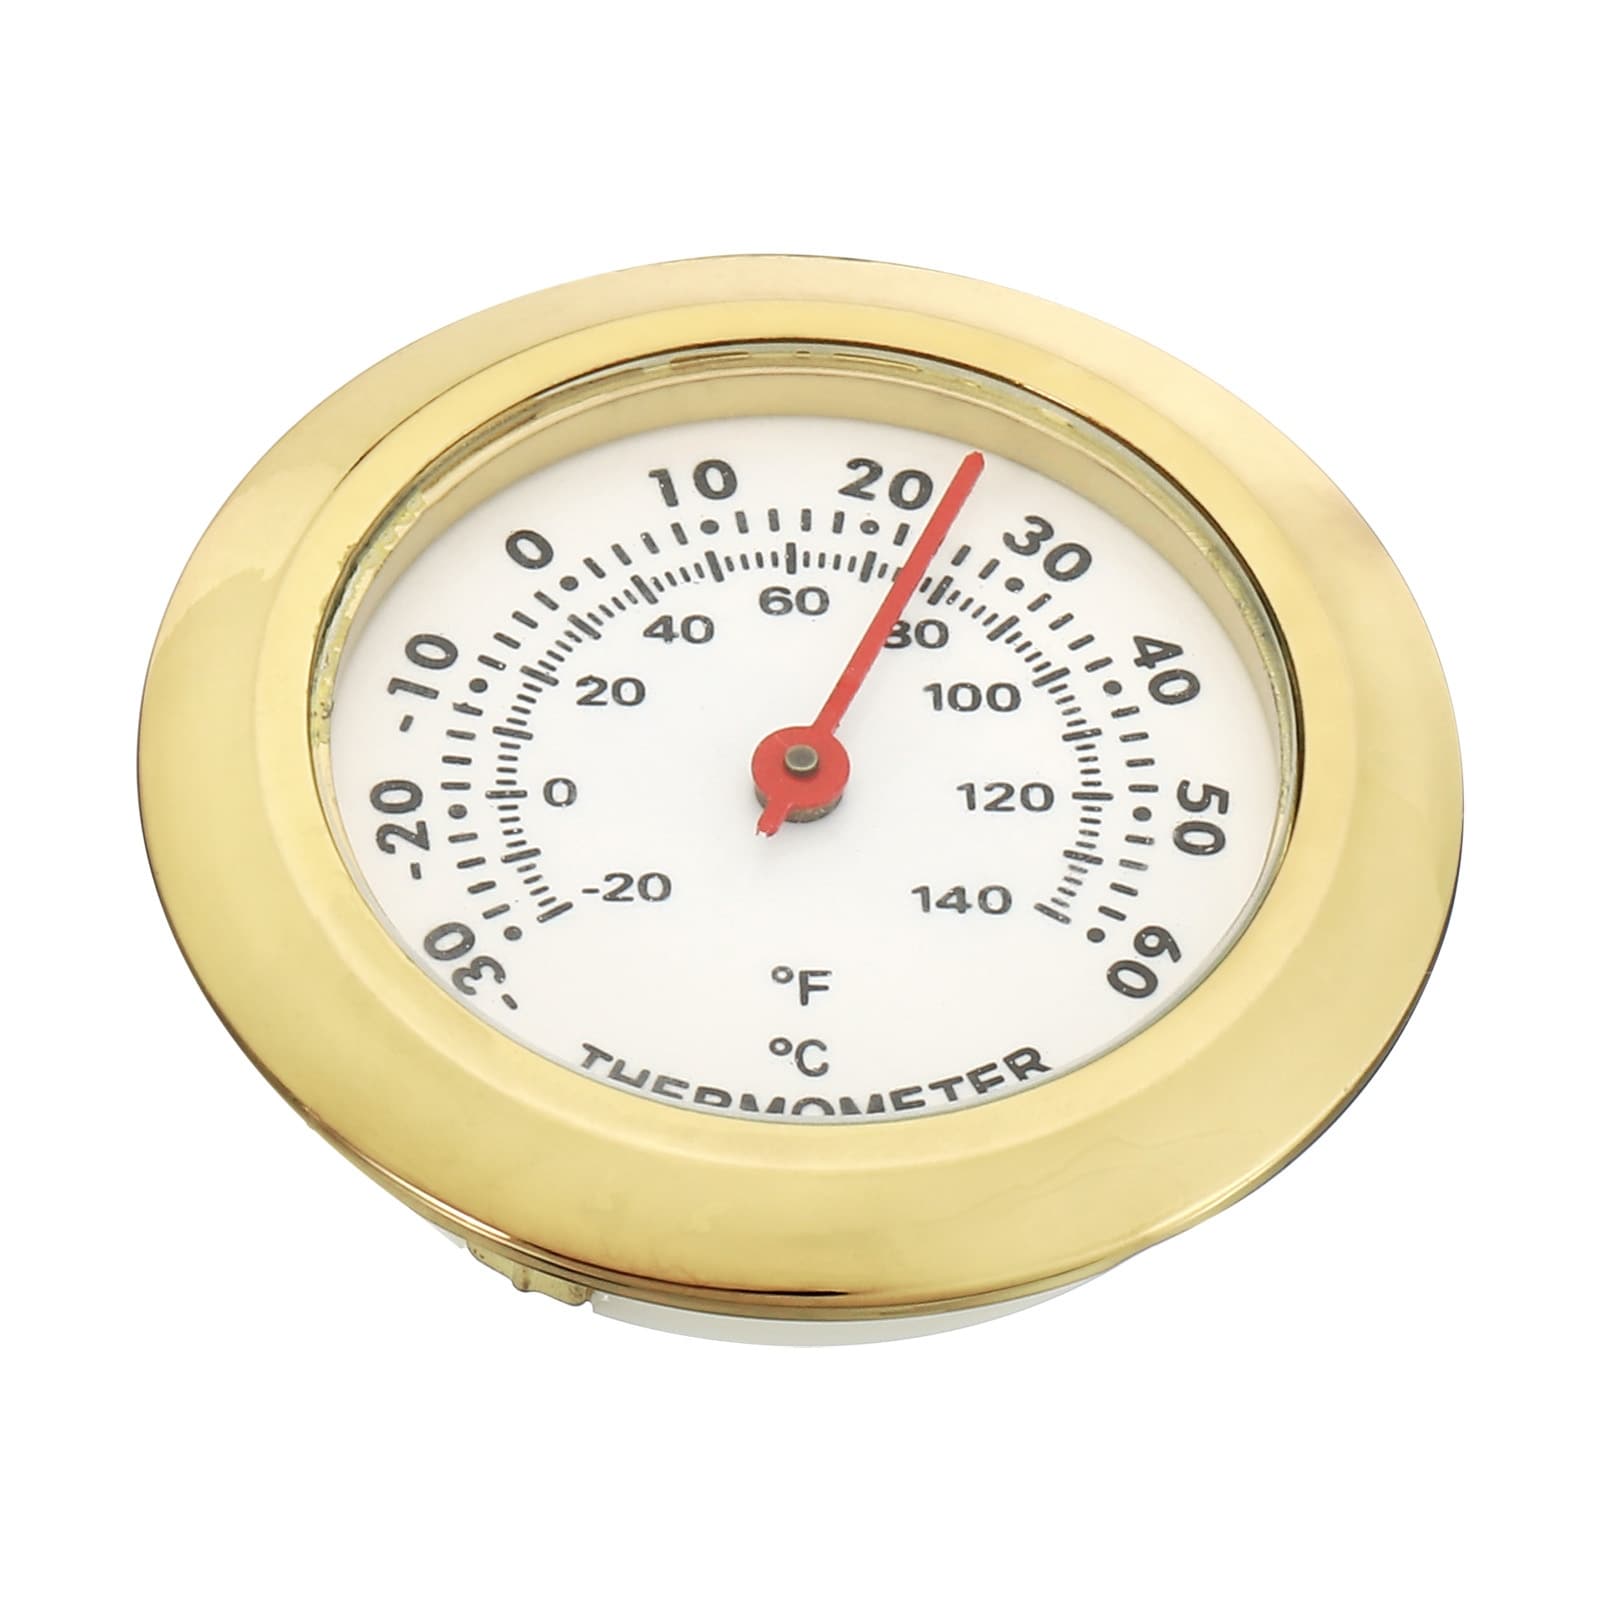 https://ak1.ostkcdn.com/images/products/is/images/direct/0eacc39d30850dc2ec50c39aee2269369cec3cd7/1.5%E2%80%9D-Mini-Indoor-Outdoor-Thermometer-%C2%B0C-%C2%B0F-Temperature-Monitor-Gauge-Gold.jpg